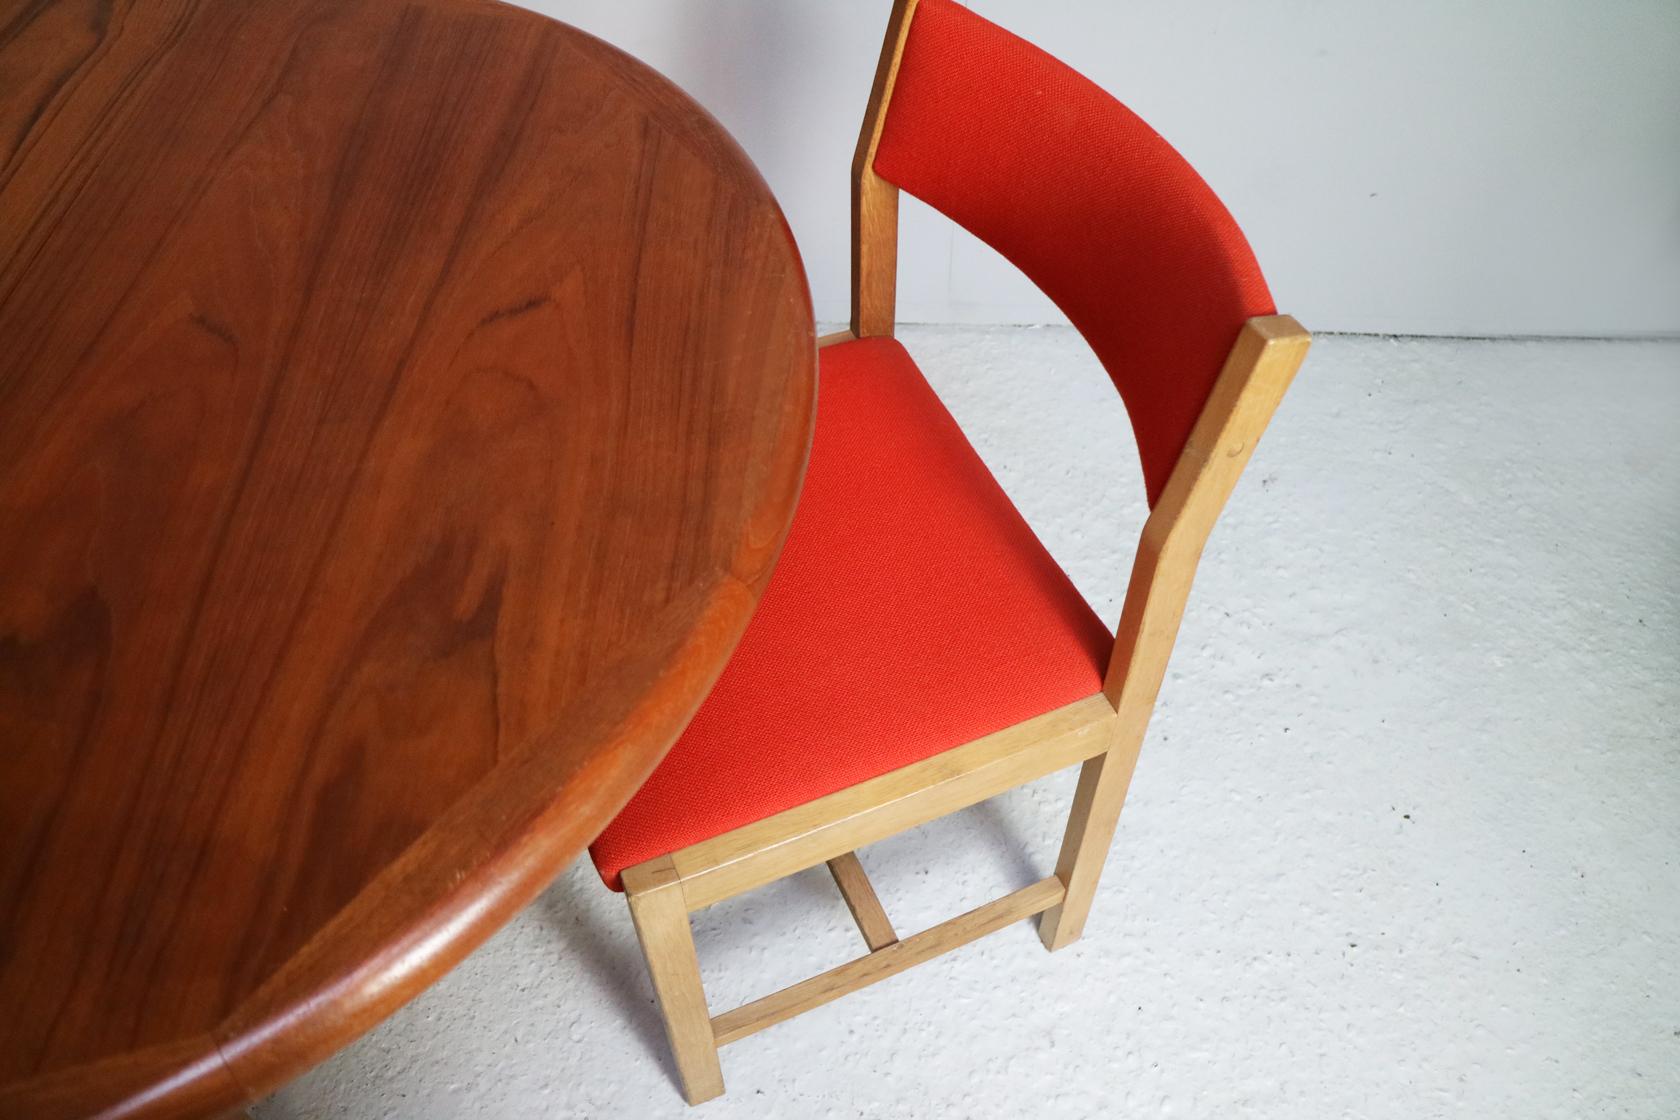 A very fine, relatively small extending Danish dining table with lovely wood grain, thick rounded edges and decorative inlaid edging. 

A total of 4 Danish dining chairs designed by Børge Mogensen, with rich red original upholstery and oak